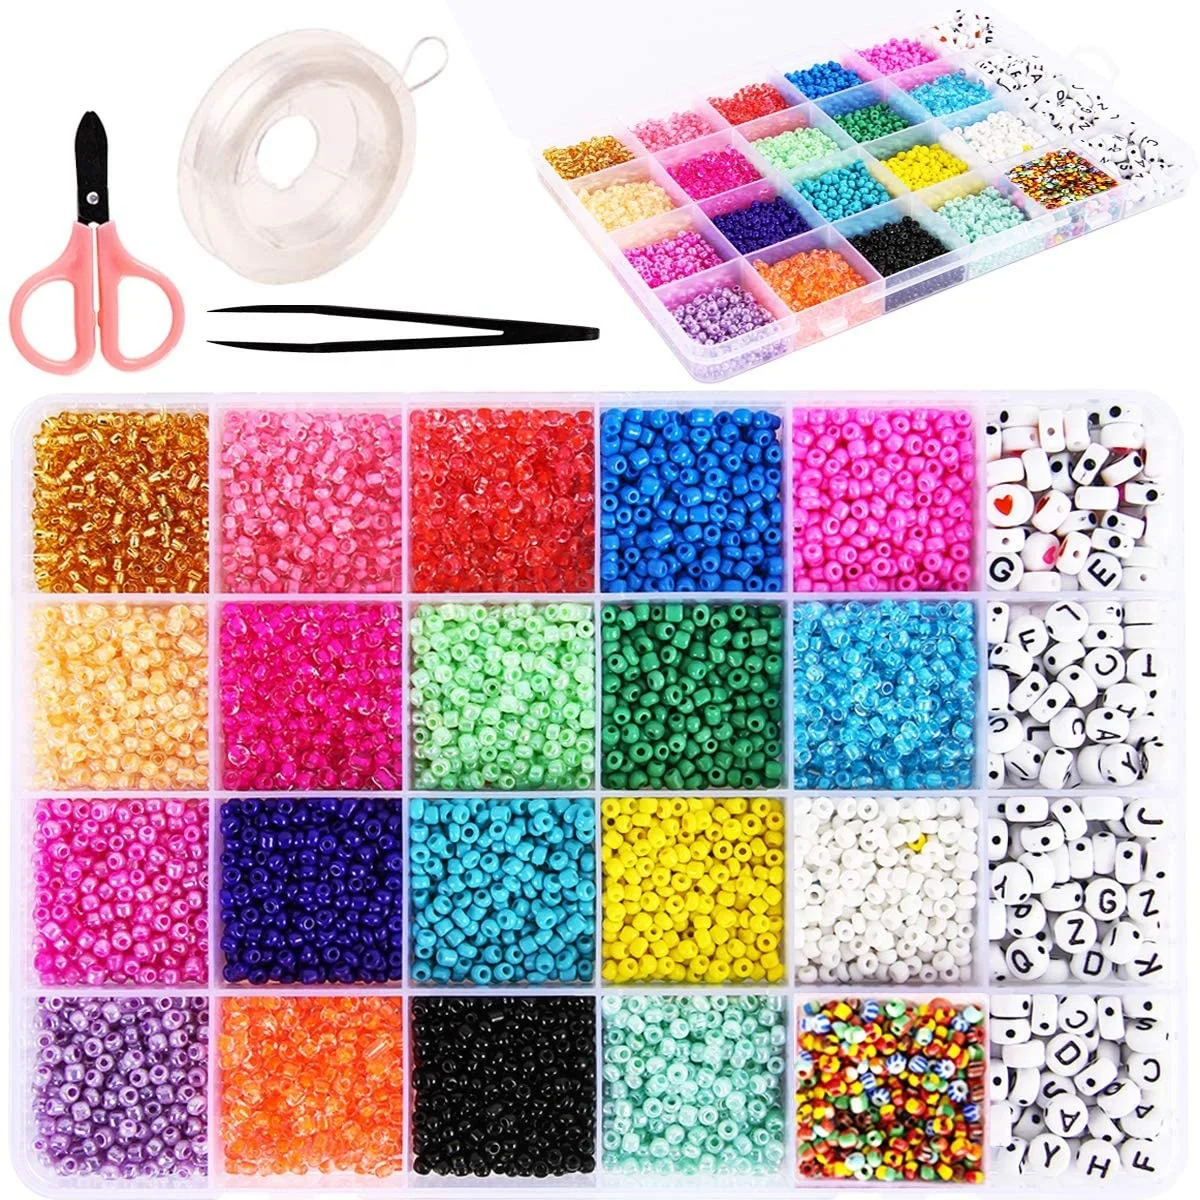 

Amazon Hot Selling 10000pcs 3mm Glass Seed Craft Beads with 300pcs Letter Beads Kit for DIY Jewelry Making Bracelets Necklace